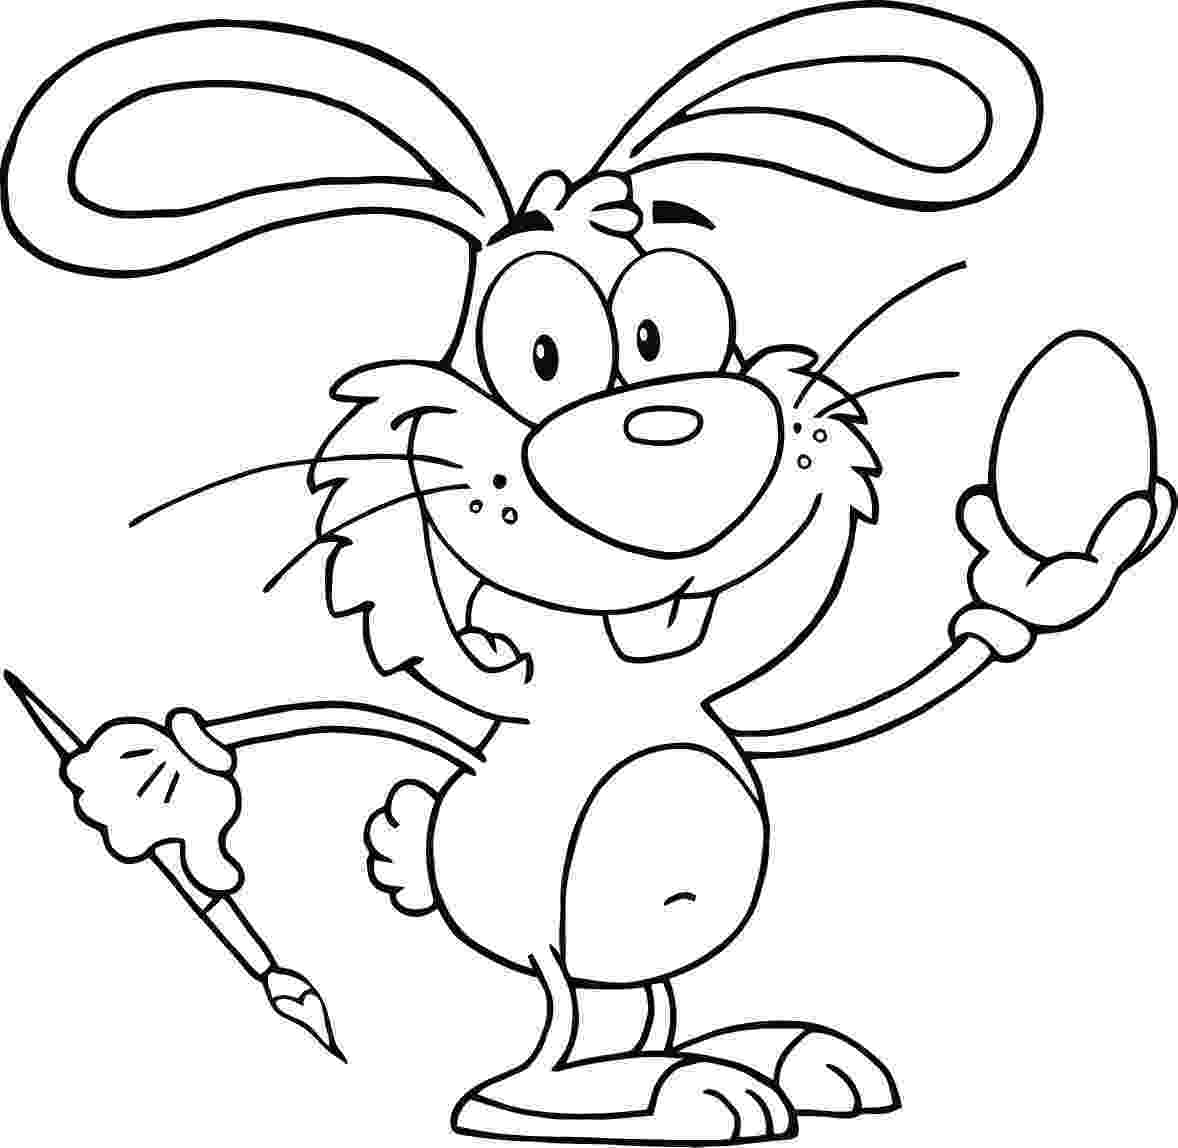 bunny coloring picture bunny coloring pages best coloring pages for kids bunny coloring picture 1 1